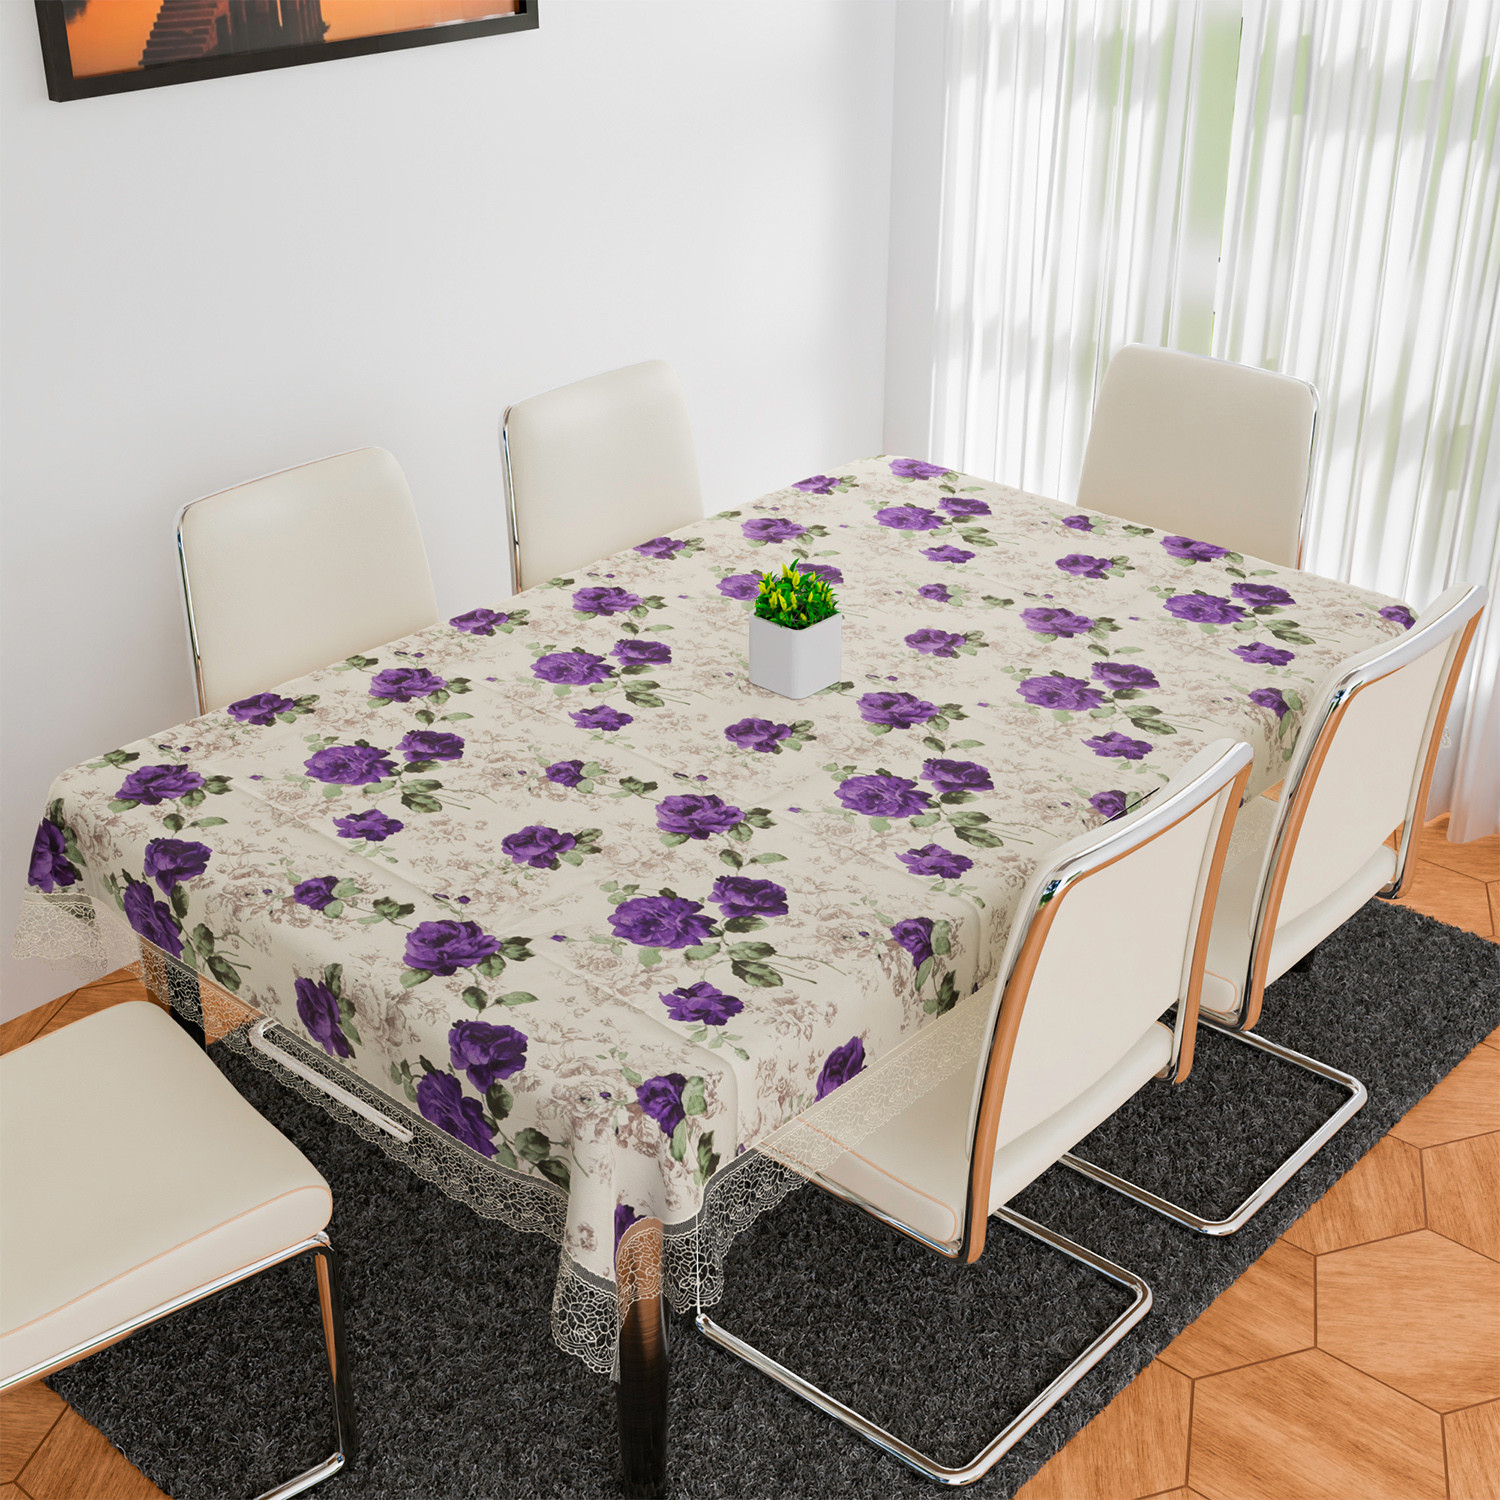 Kuber Industries Dining Table Cover | PVC Table Cover | Reusable Cloth Cover for Table Top | Purple Flower Dining Table Cover | Table Protector Cover | 60x90 Inch | Cream